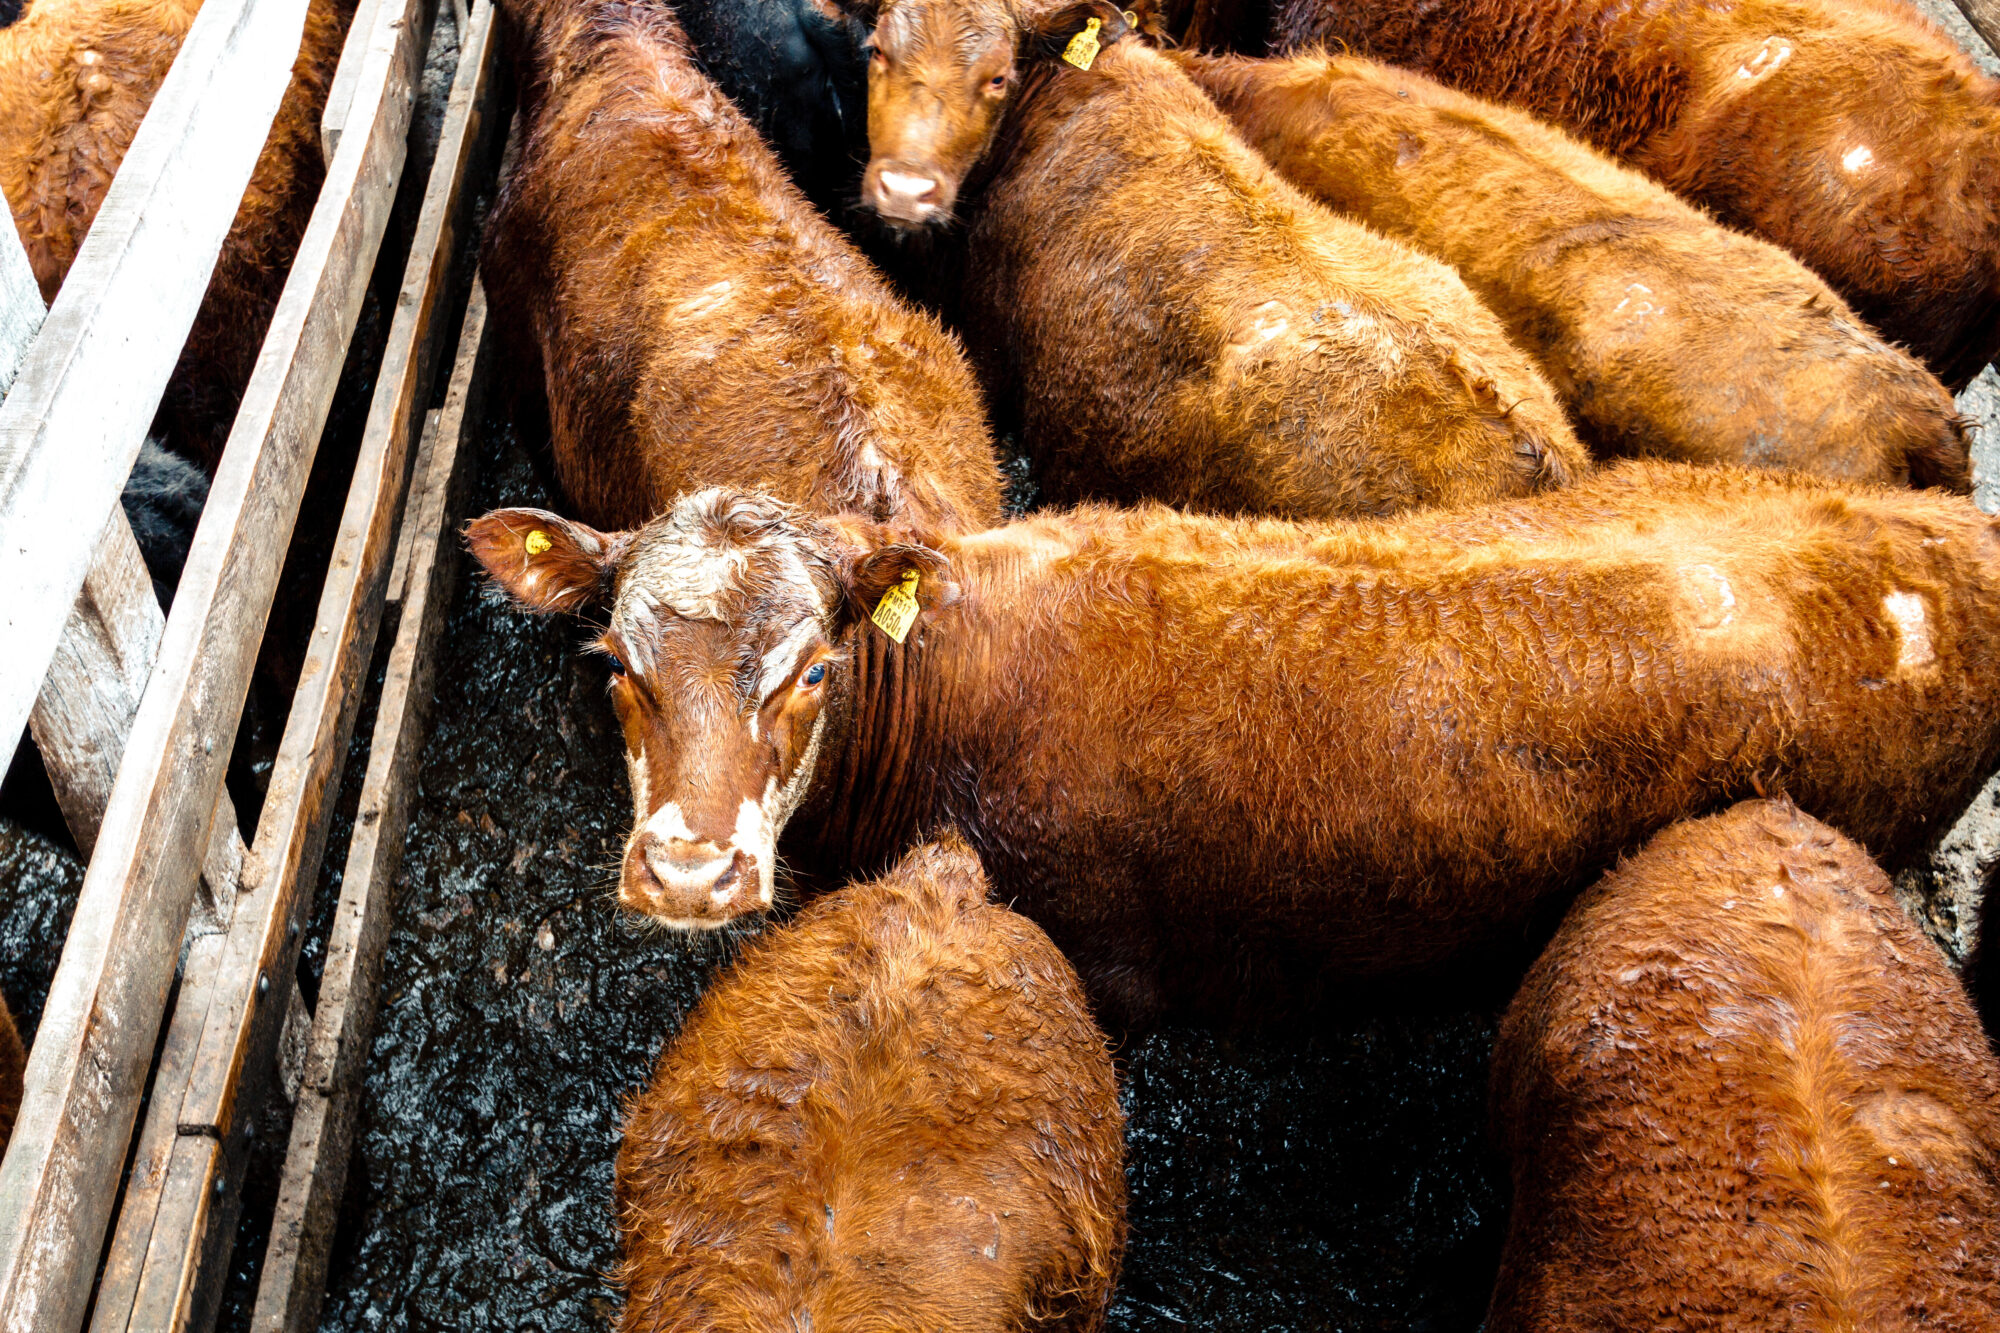 <p>Hereford calves browns in the Liniers Market in Buenos Aires, Argentina (Image: Alamy)</p>